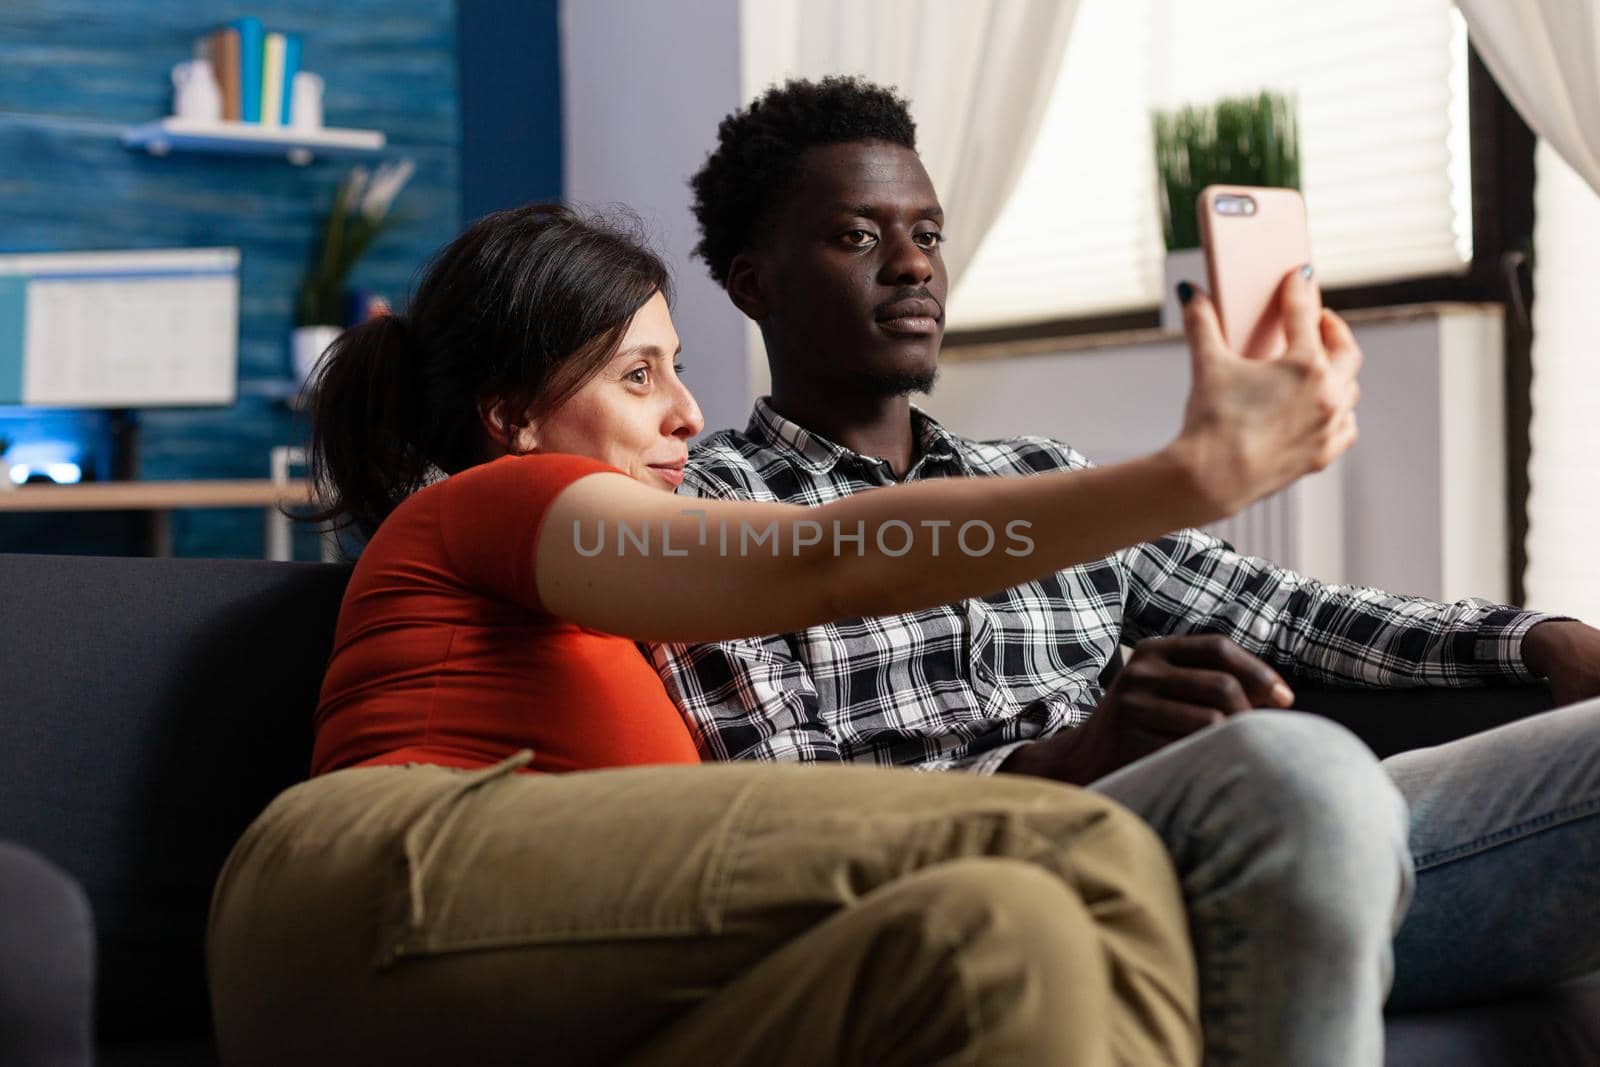 Joyful interracial couple taking selfies together at home by DCStudio